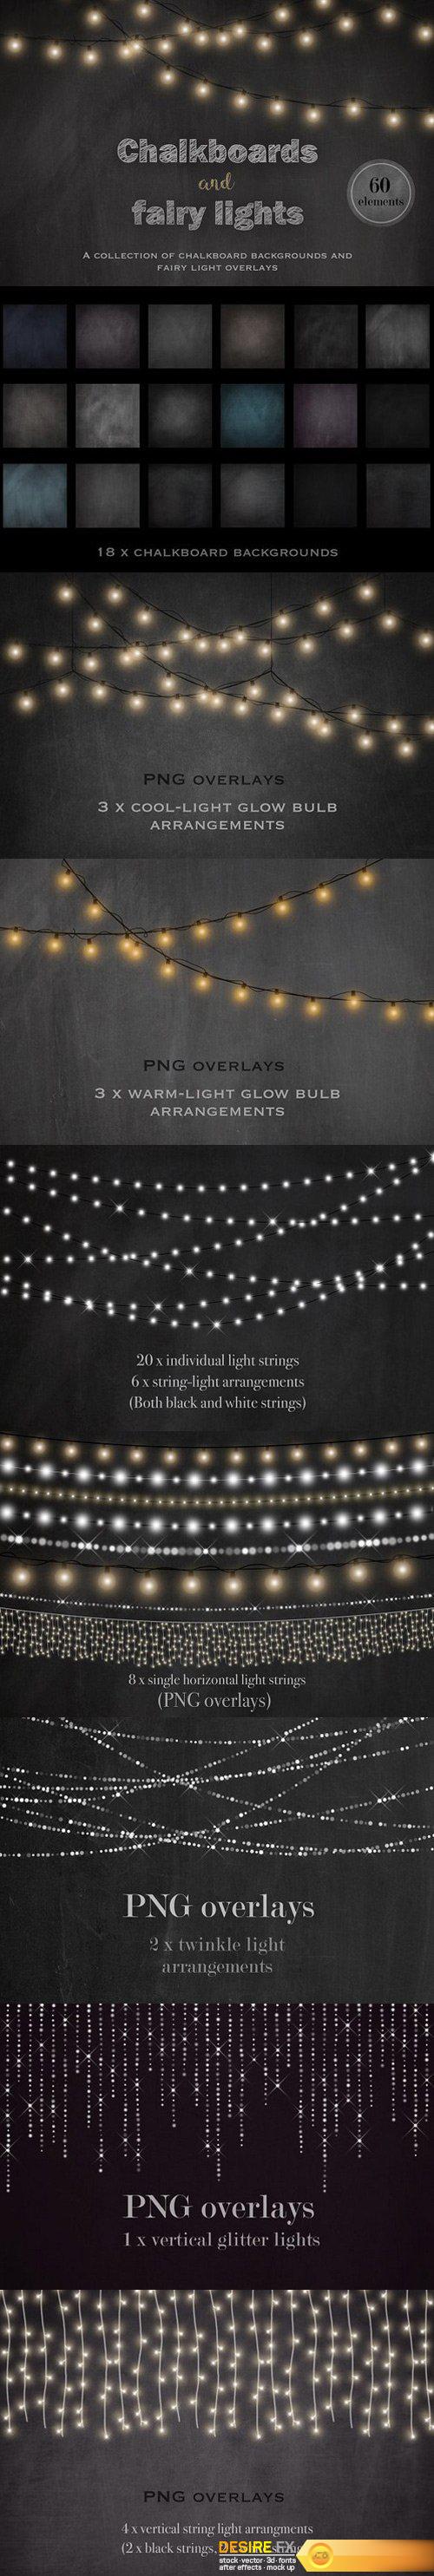 CM – Chalkboards and fairy lights 1482204